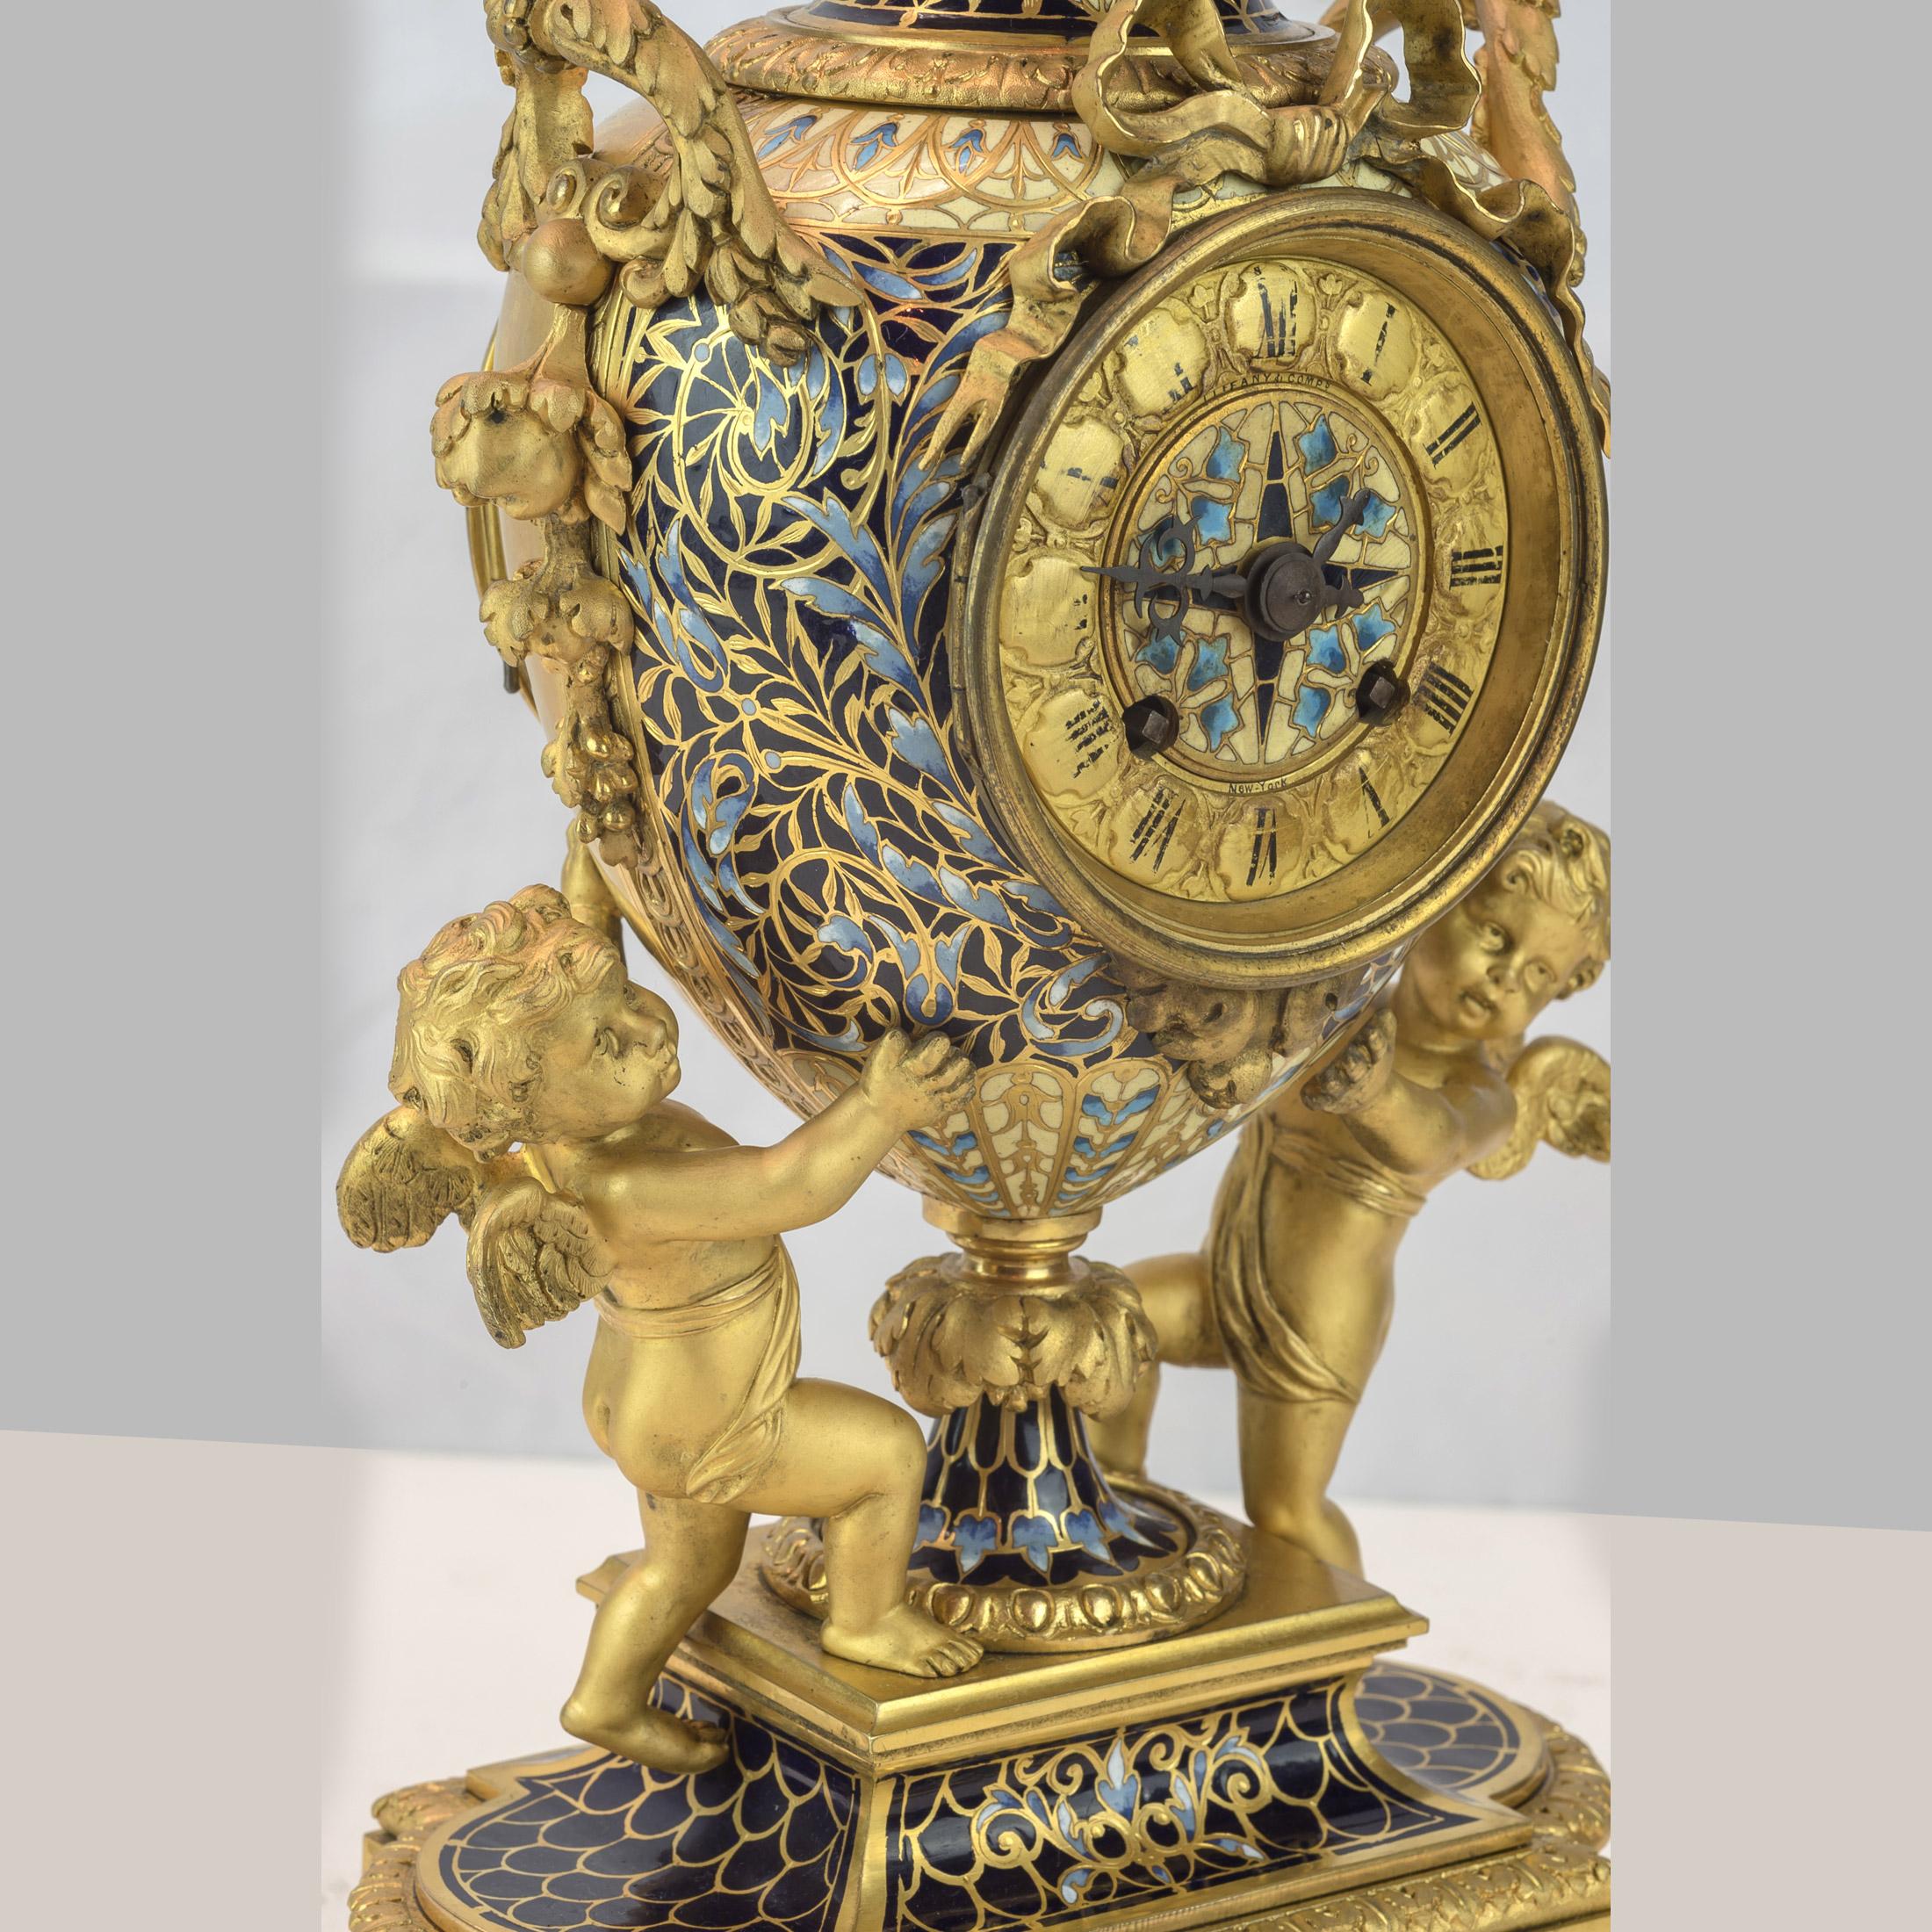 19th Century Louis XV Style Champleve Enamel and Gilt Bronze Clock For Sale